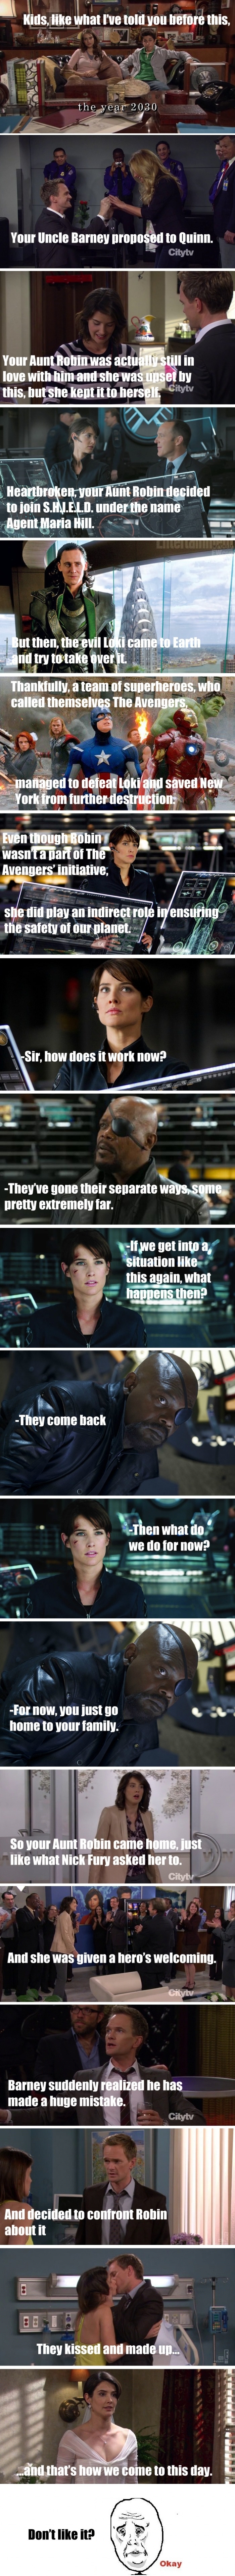 Why she joined S.H.I.E.L.D